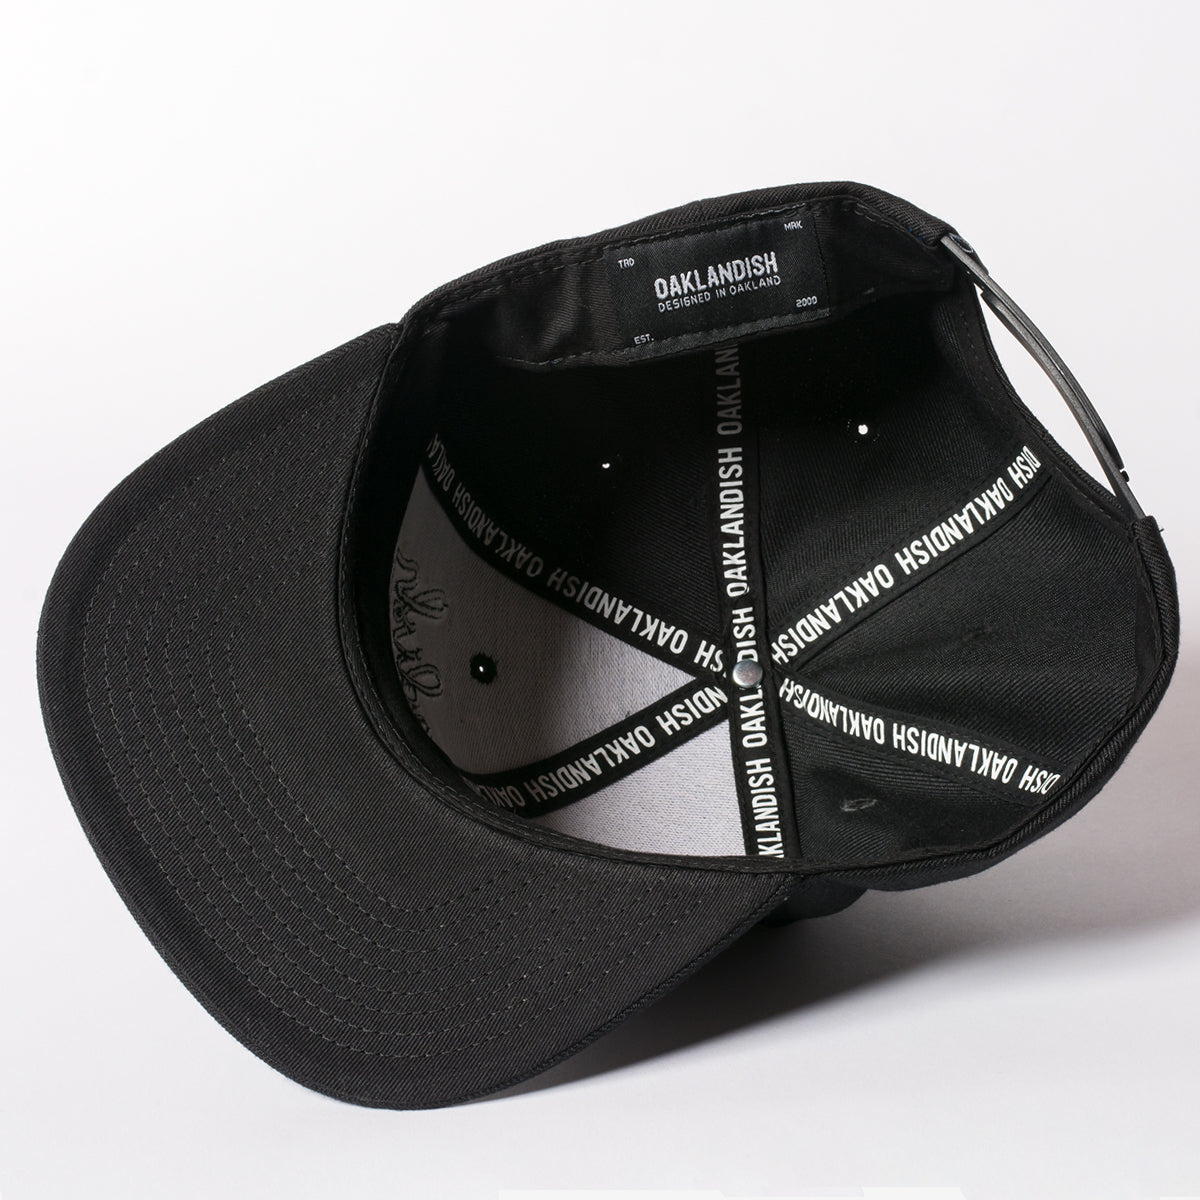 Snapback Cap - Black with Silver Embroidered Oaklandish Tree Logo